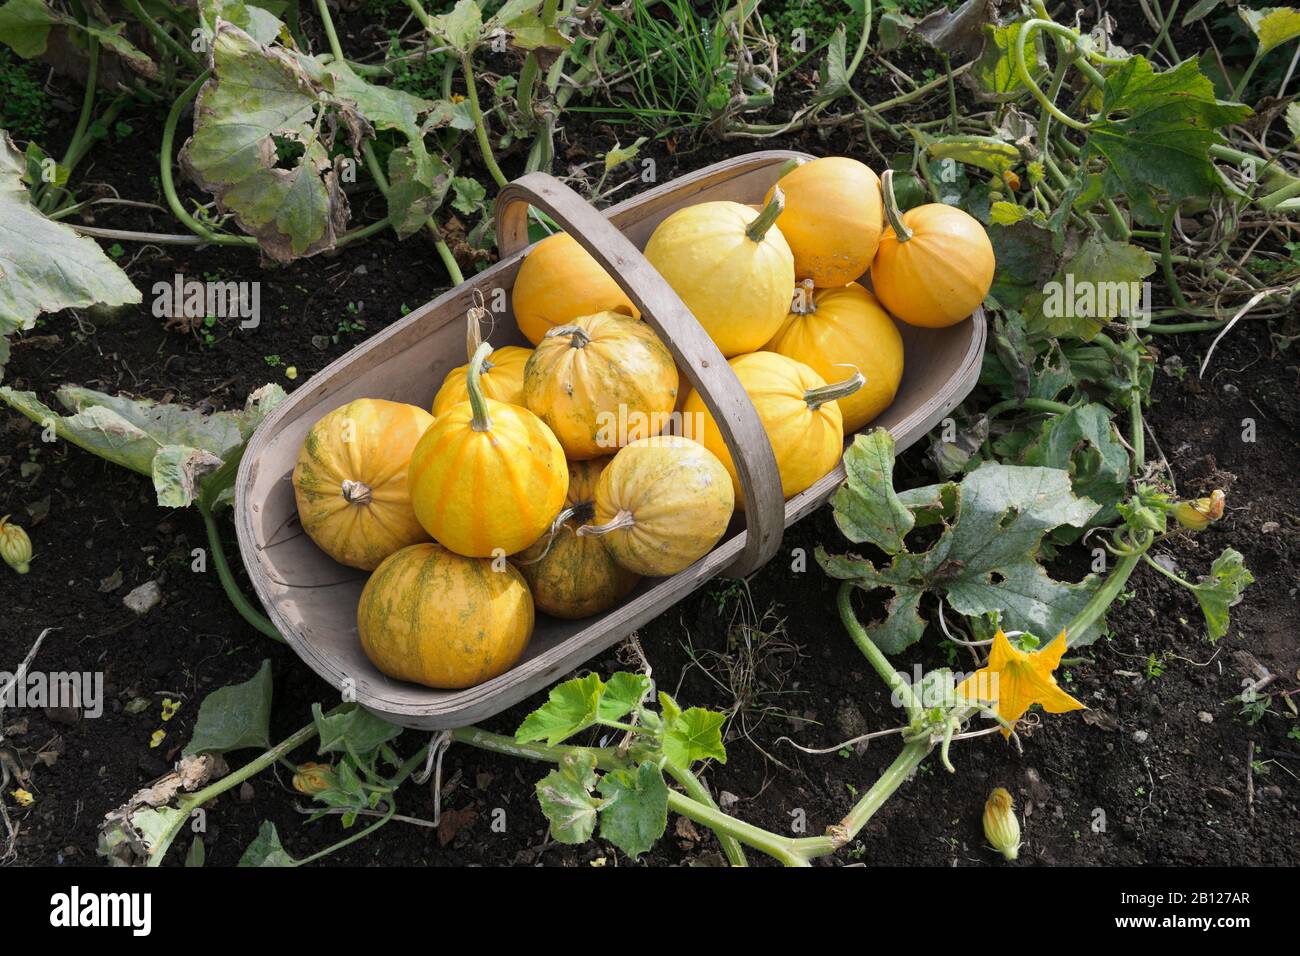 Wooden trug filled with small yellow squash. Ram's Kodu. End of summer, trailing shoots and leaves, on vegetable bed, Stock Photo